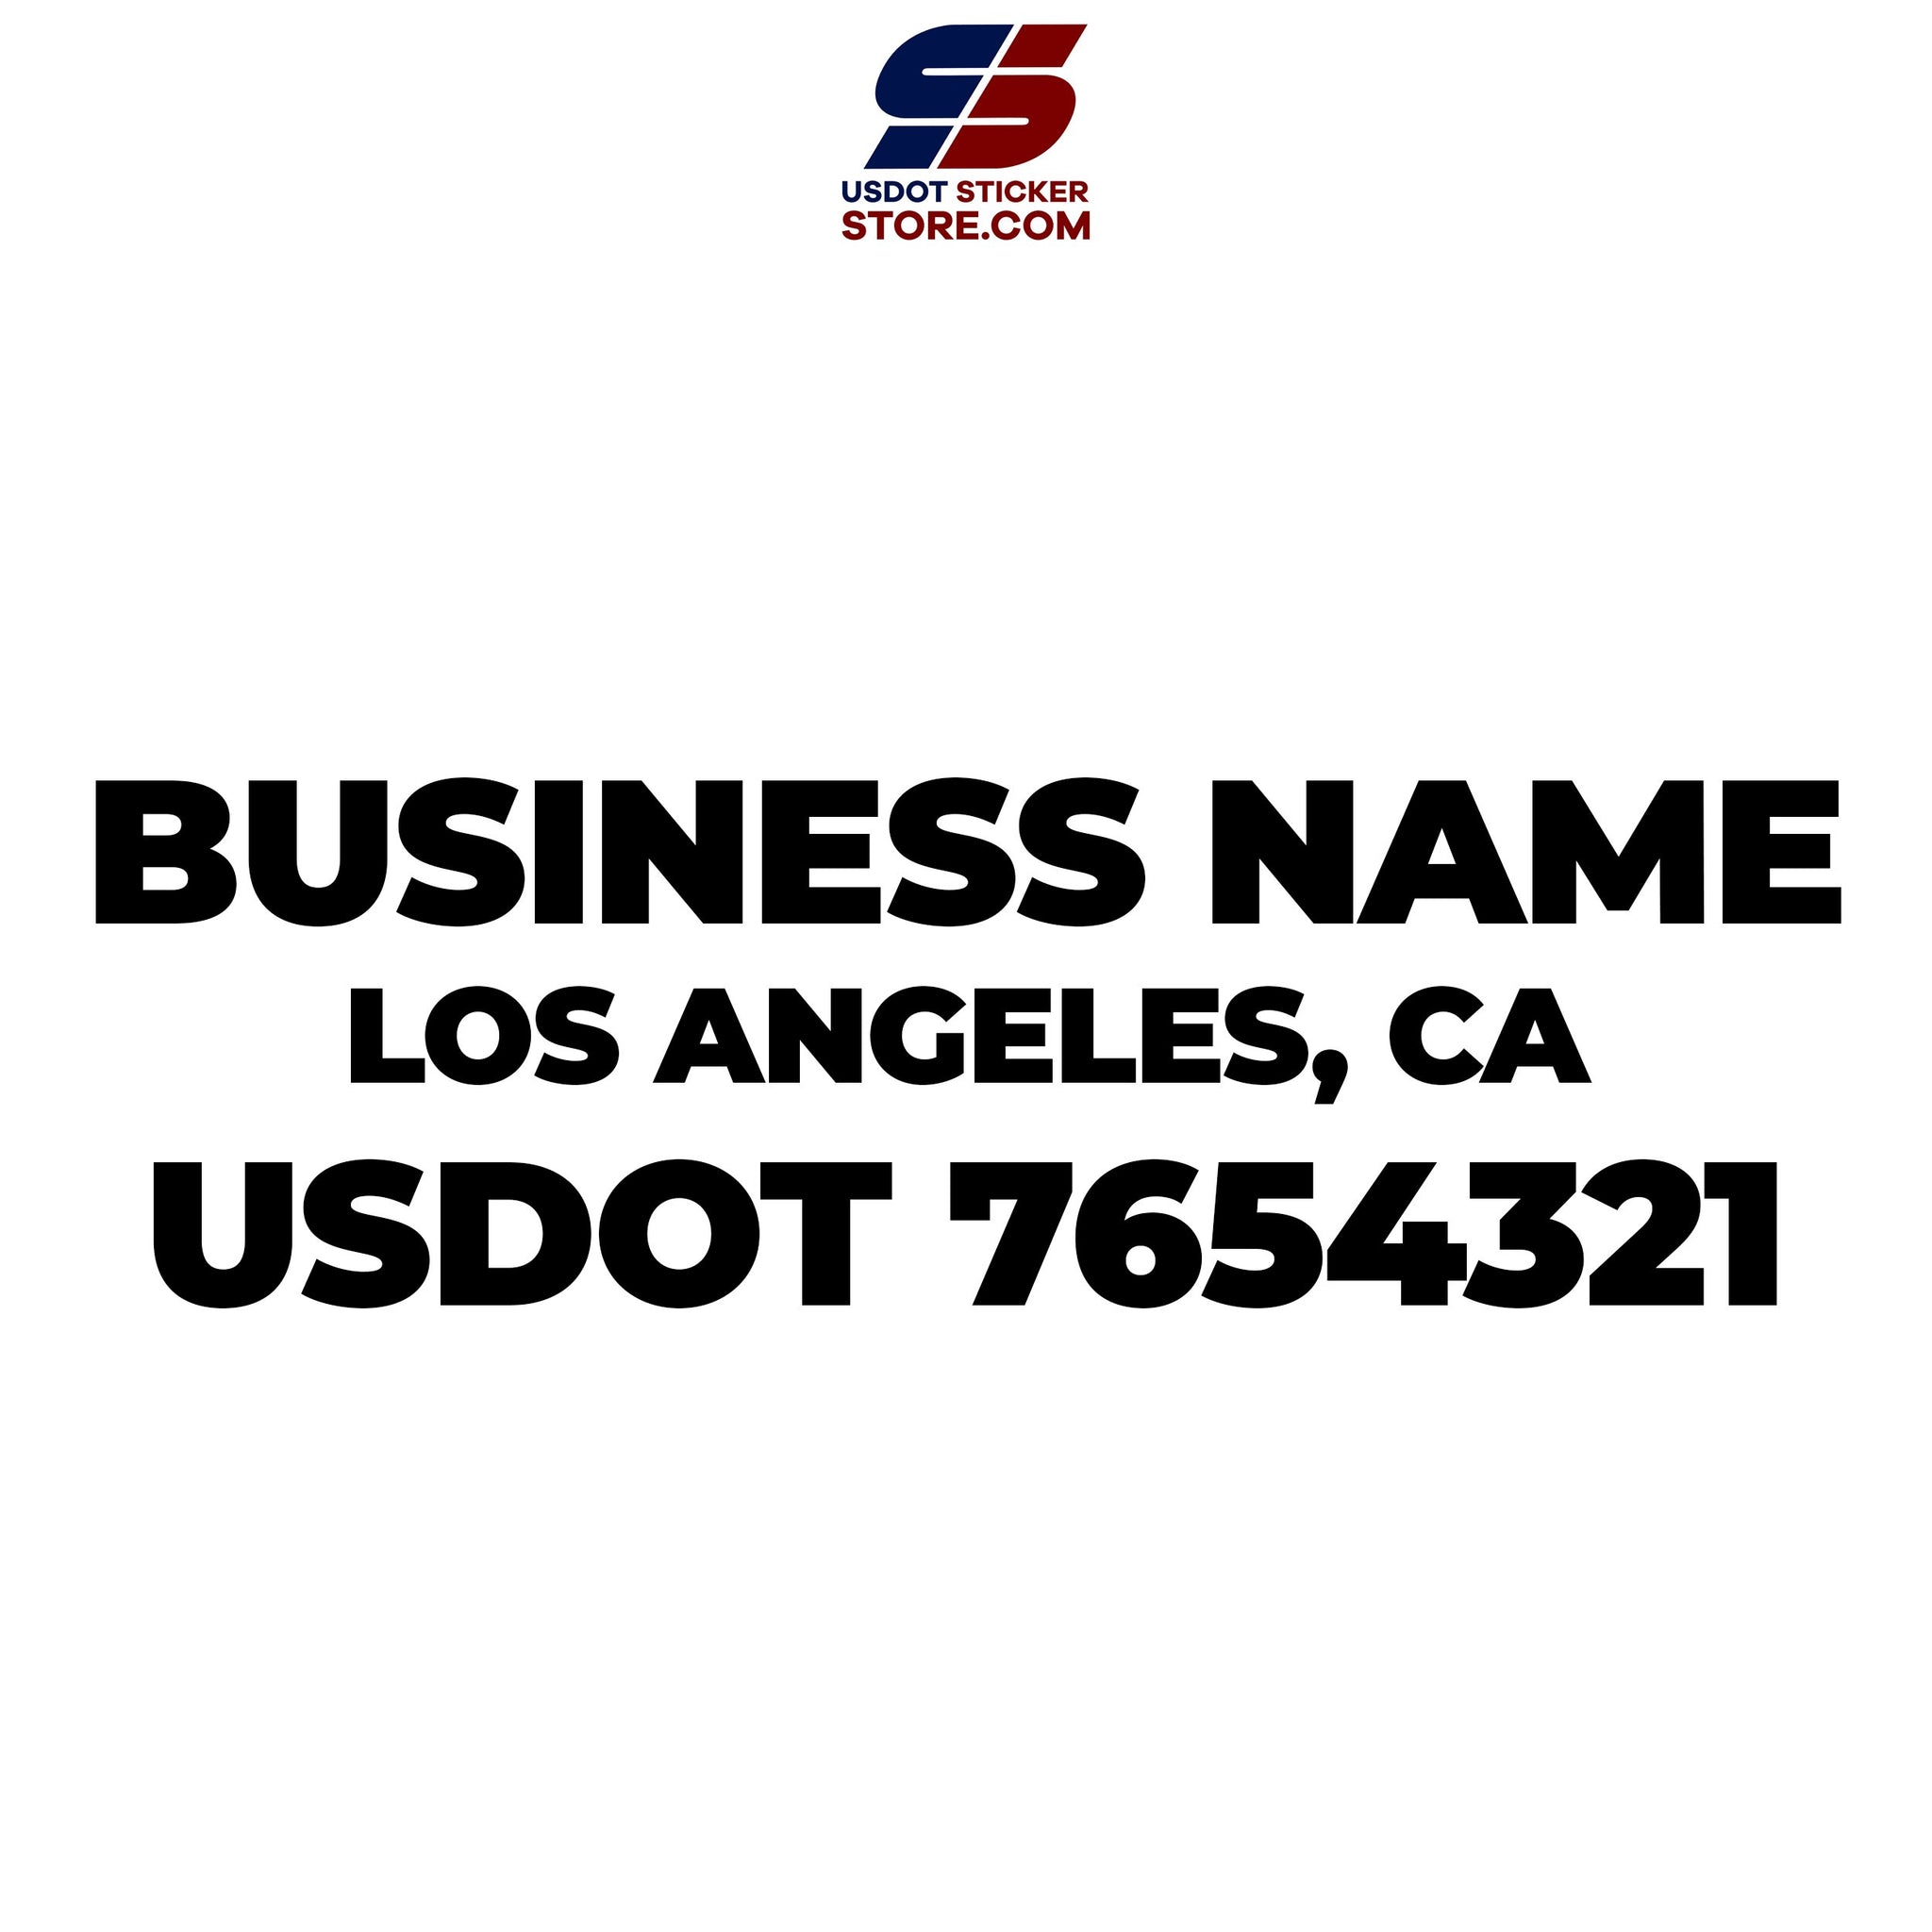 business name, location and usdot number decal